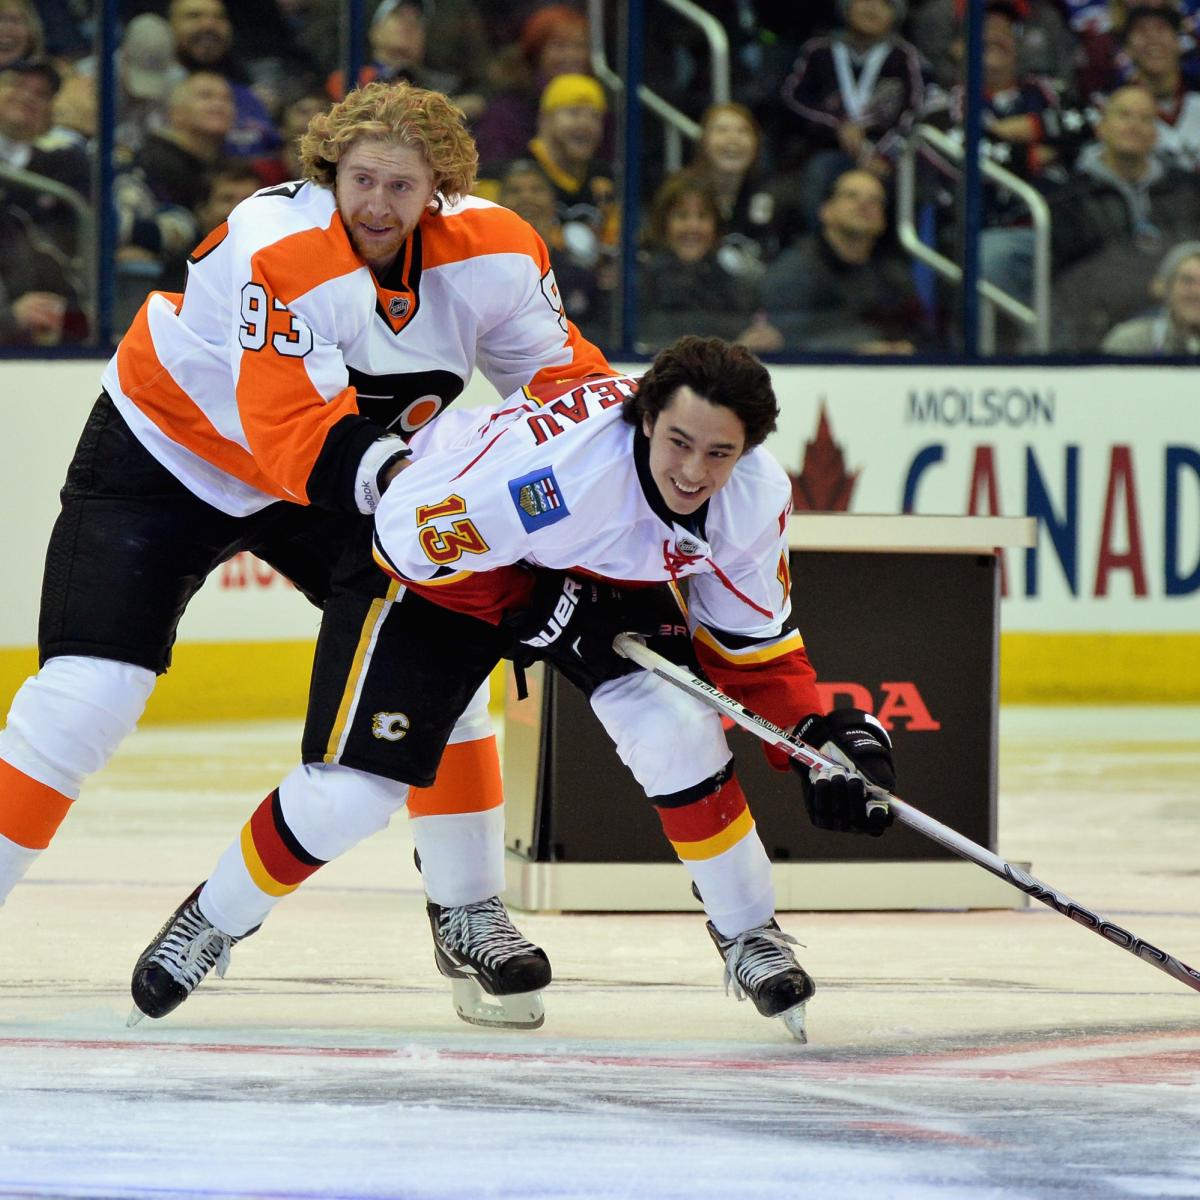 NHL - Jakub Voracek, the man with the mane that can't be tamed